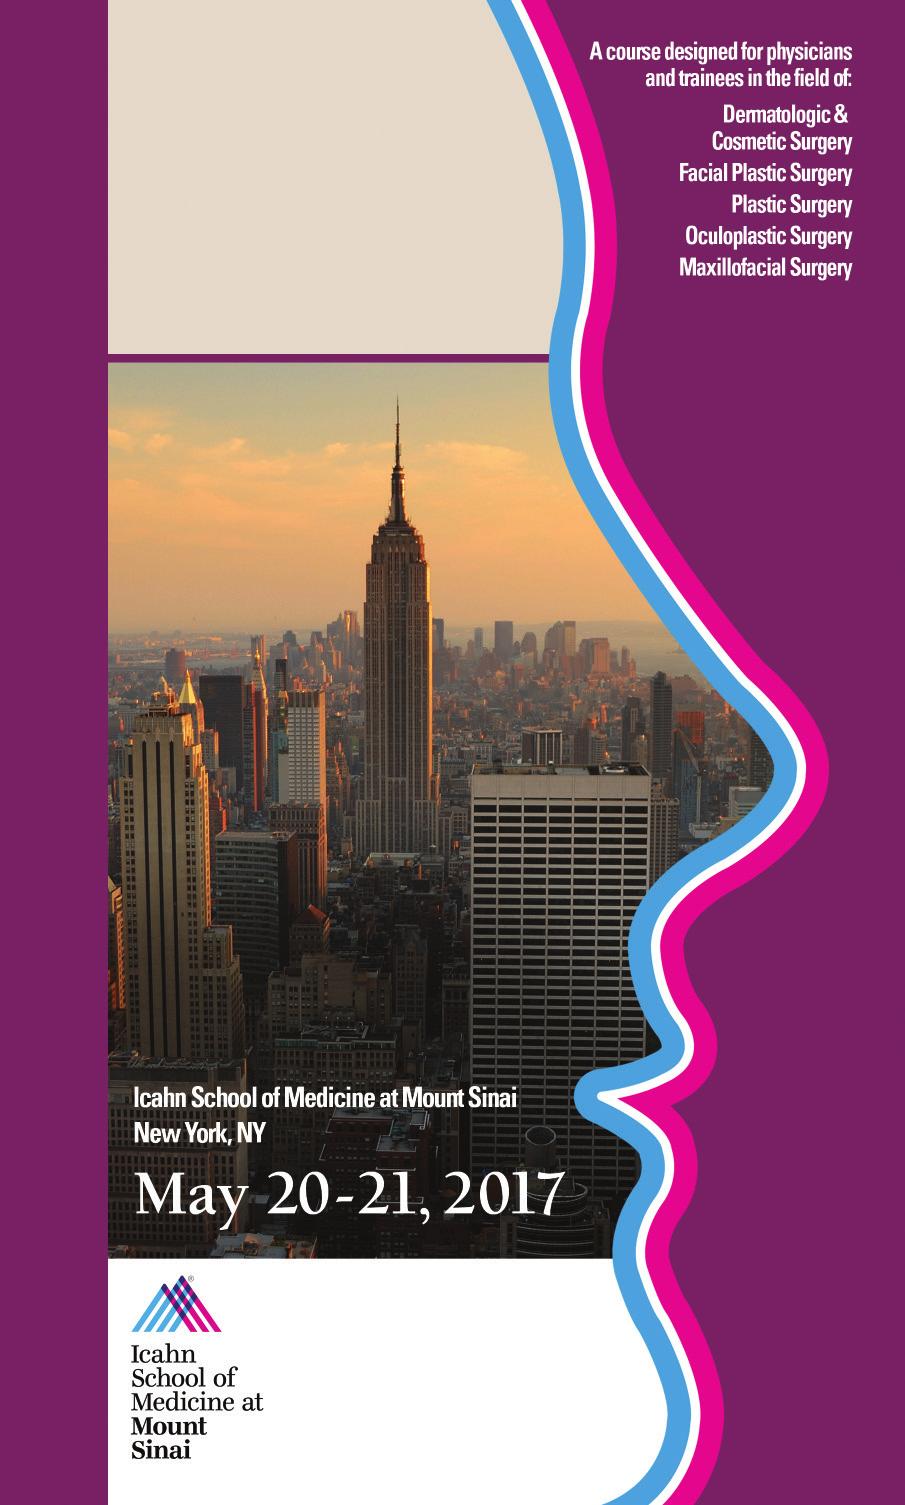 MOUNT Mount SINAI Sinai 2017 2015 SPRING Spring Symposium SYMPOSIUM ADVANCES in FACIAL RECONSTRUCTION & COSMETIC SURGERY: A HANDS ON CADAVER WORKSHOP & Board Review Program Meeting Chair Hooman